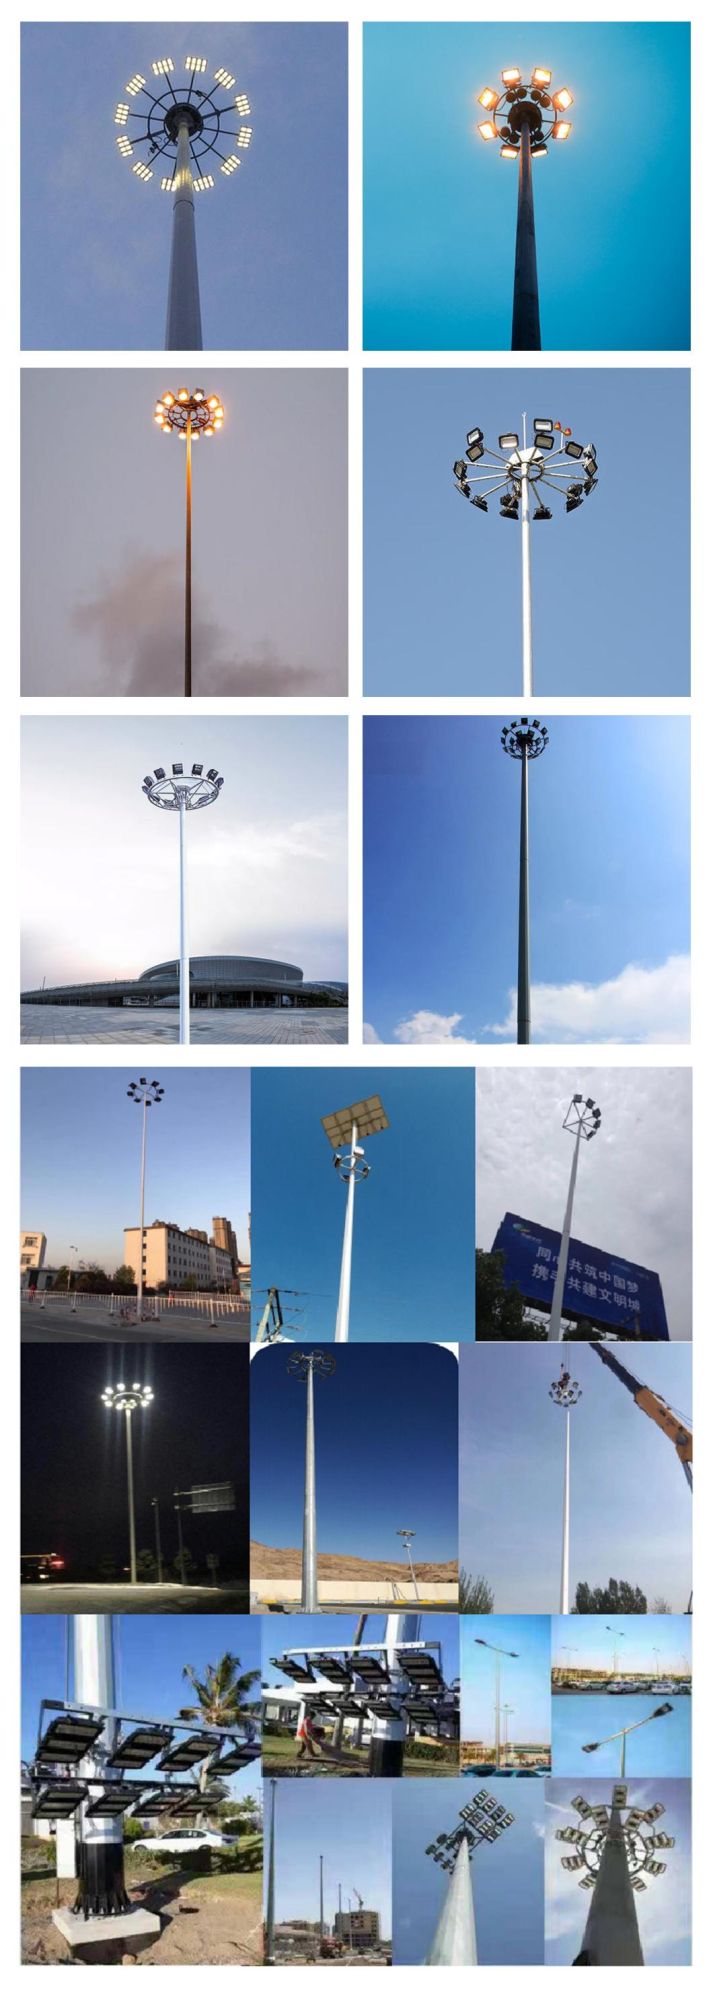 25m-40m High Mast Lighting Pole with Raising and Lowering Device